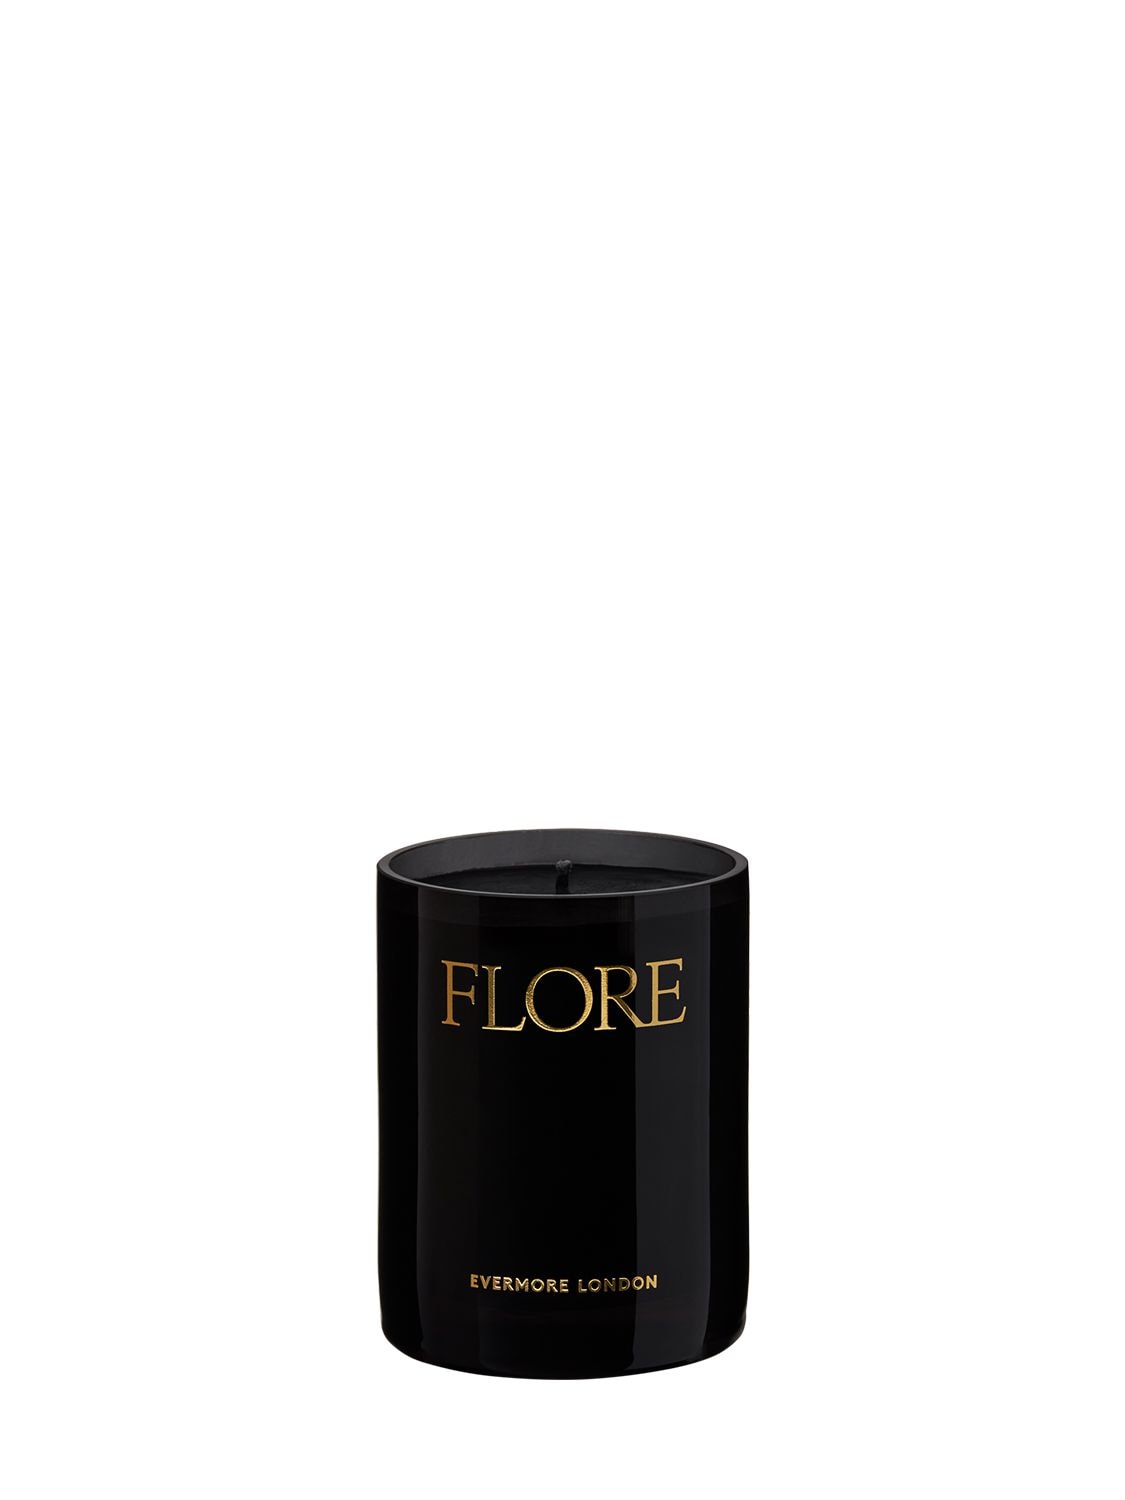 Evermore 300g Flore Scented Candle In Black